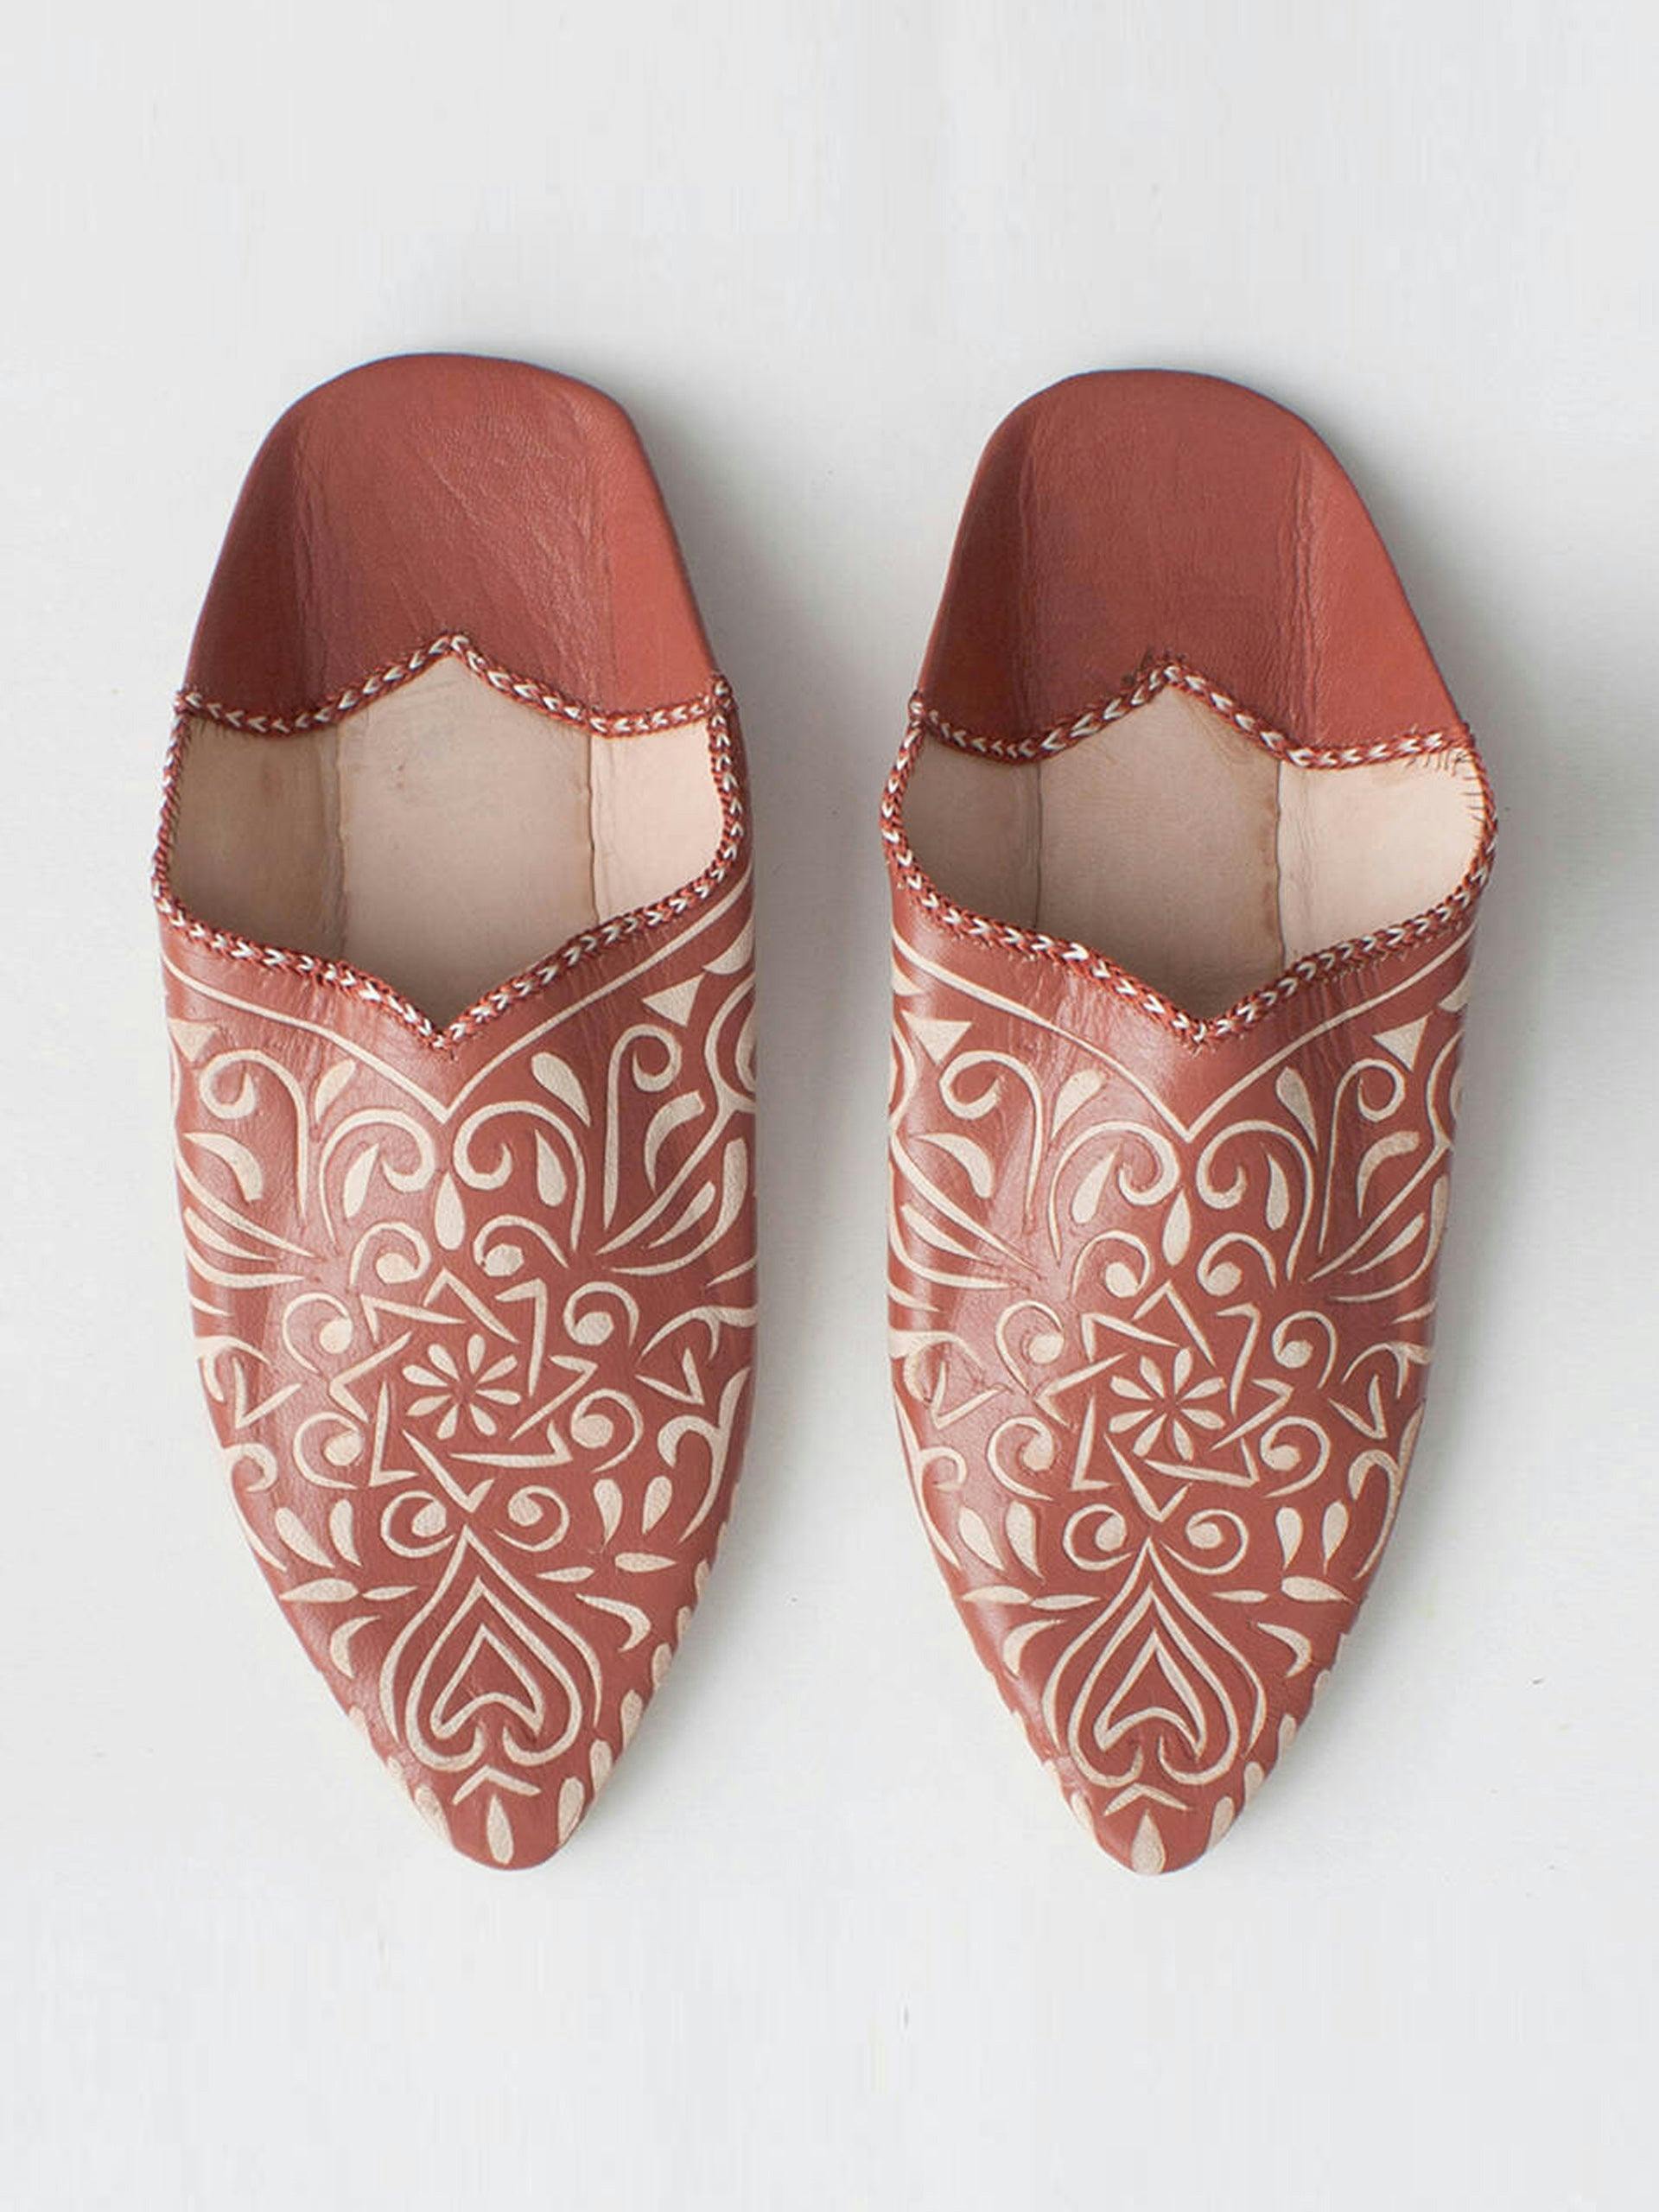 Moroccan decorative babouche slippers